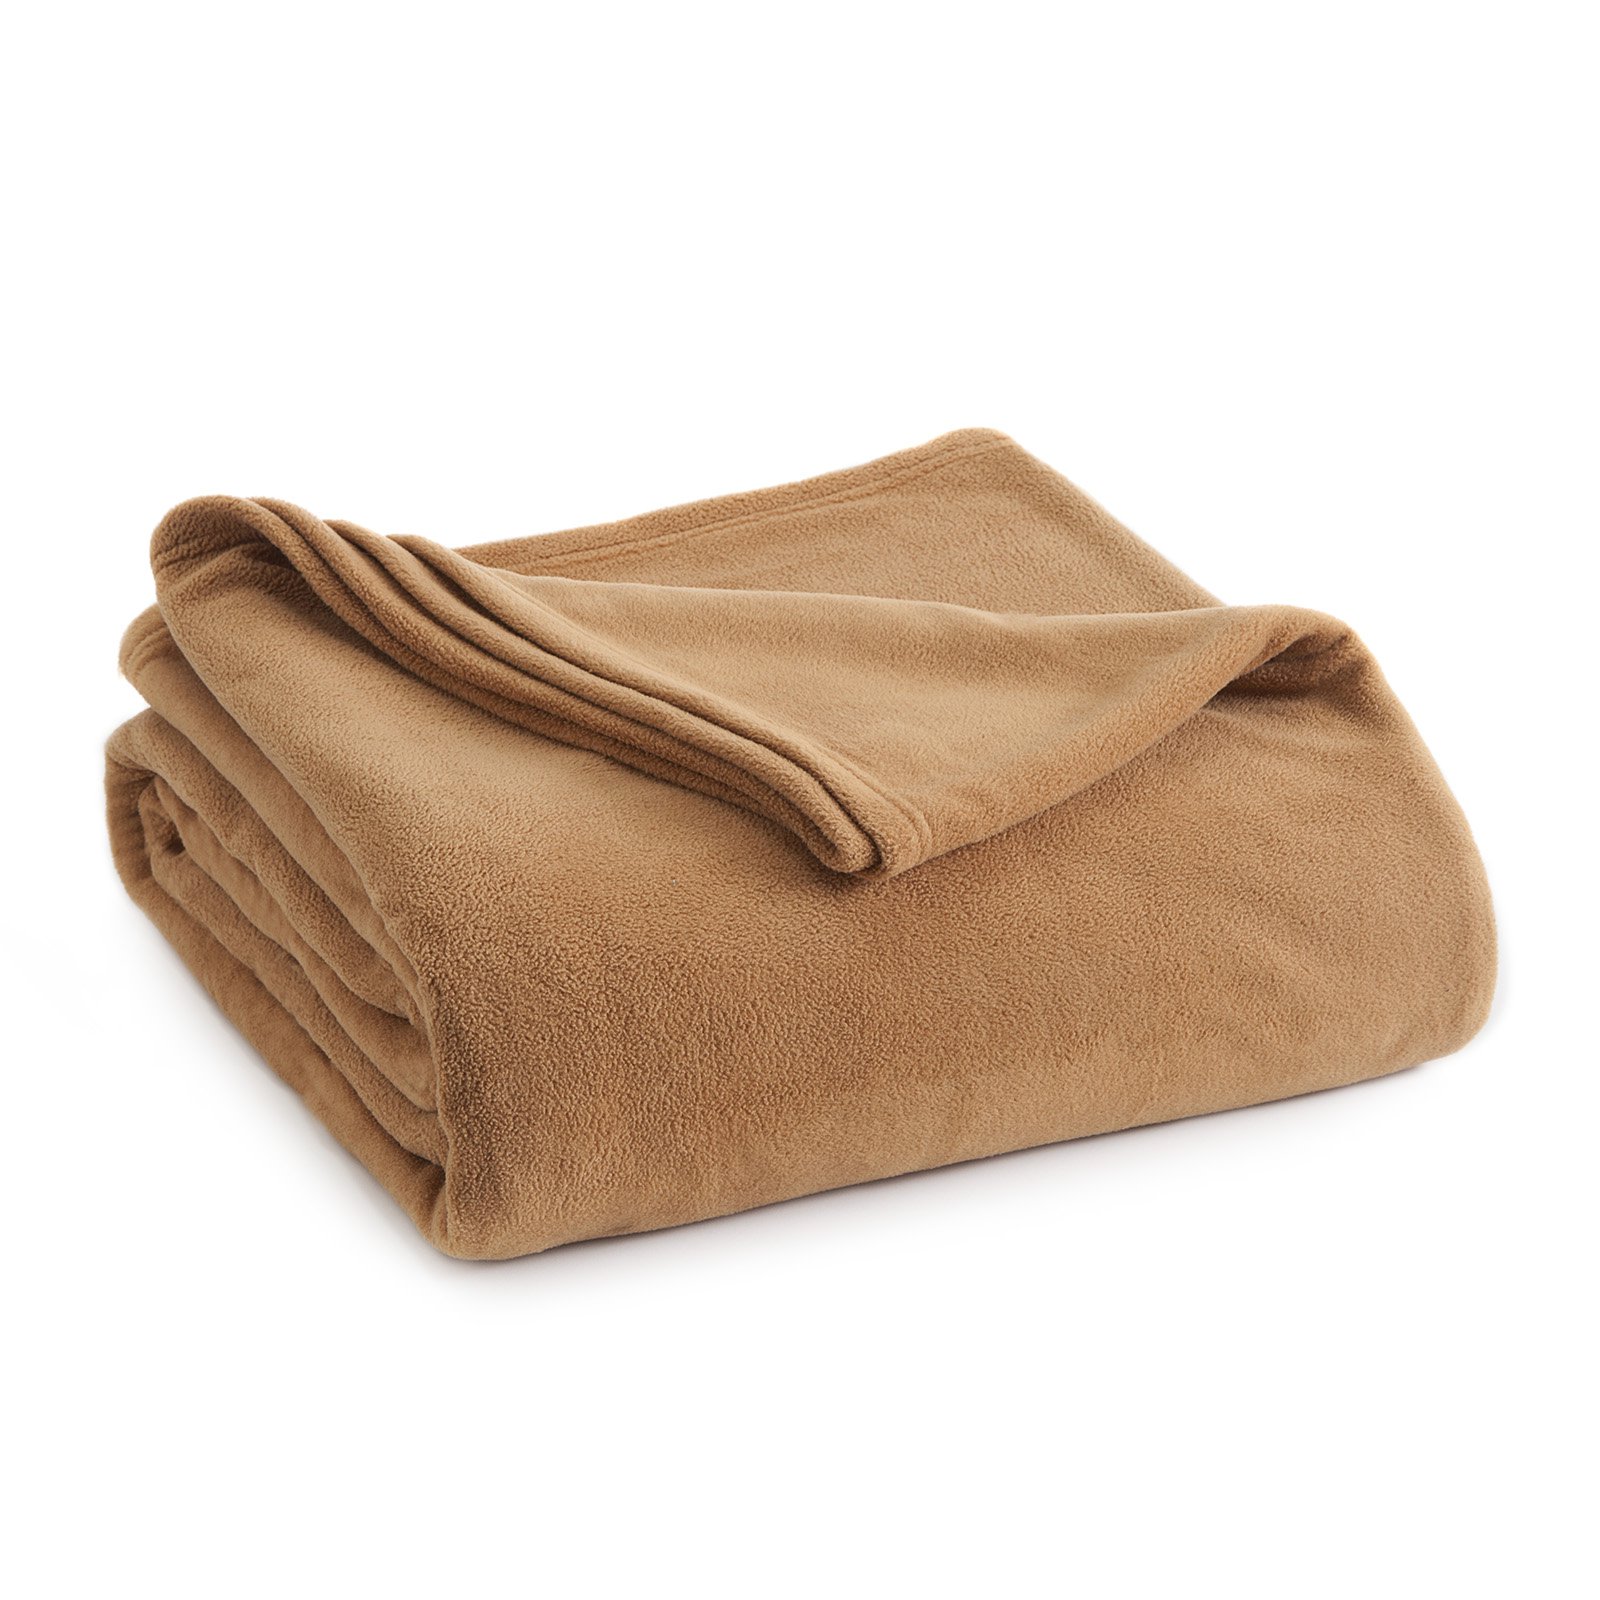 Vellux Microfleece Supersoft Lightweight Bed Blanket (Available in Multiple Sizes and Colors), Twin, Tobacco Brown - image 1 of 2